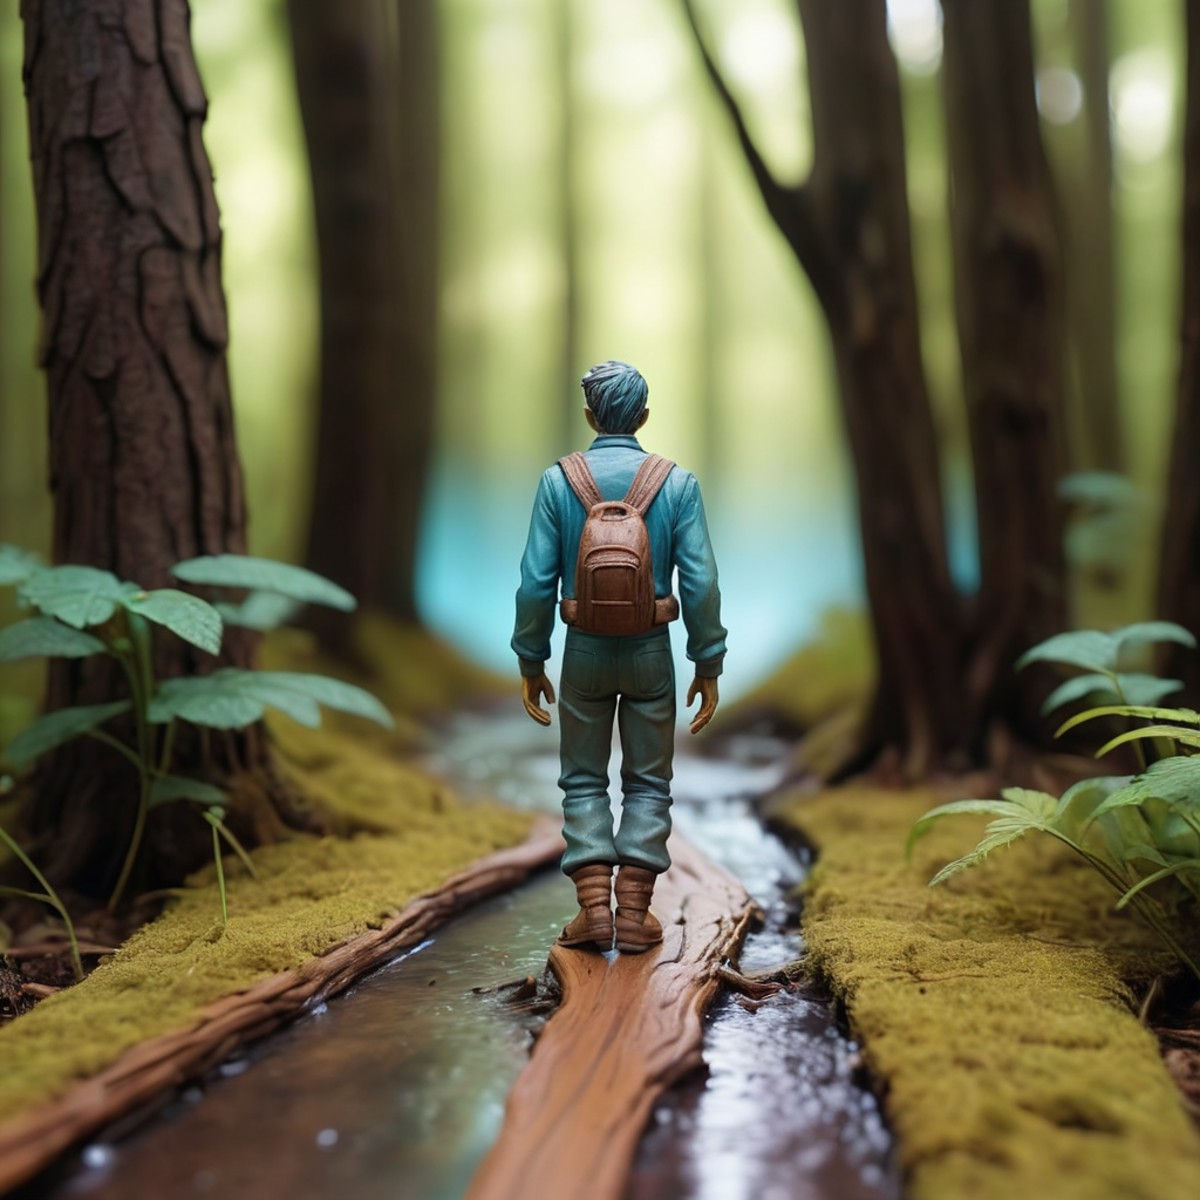 Plastic Action Figure of a Conversational ("Two roads diverged in a wood, and Iâ I took the one less traveled by.":1.3) ...